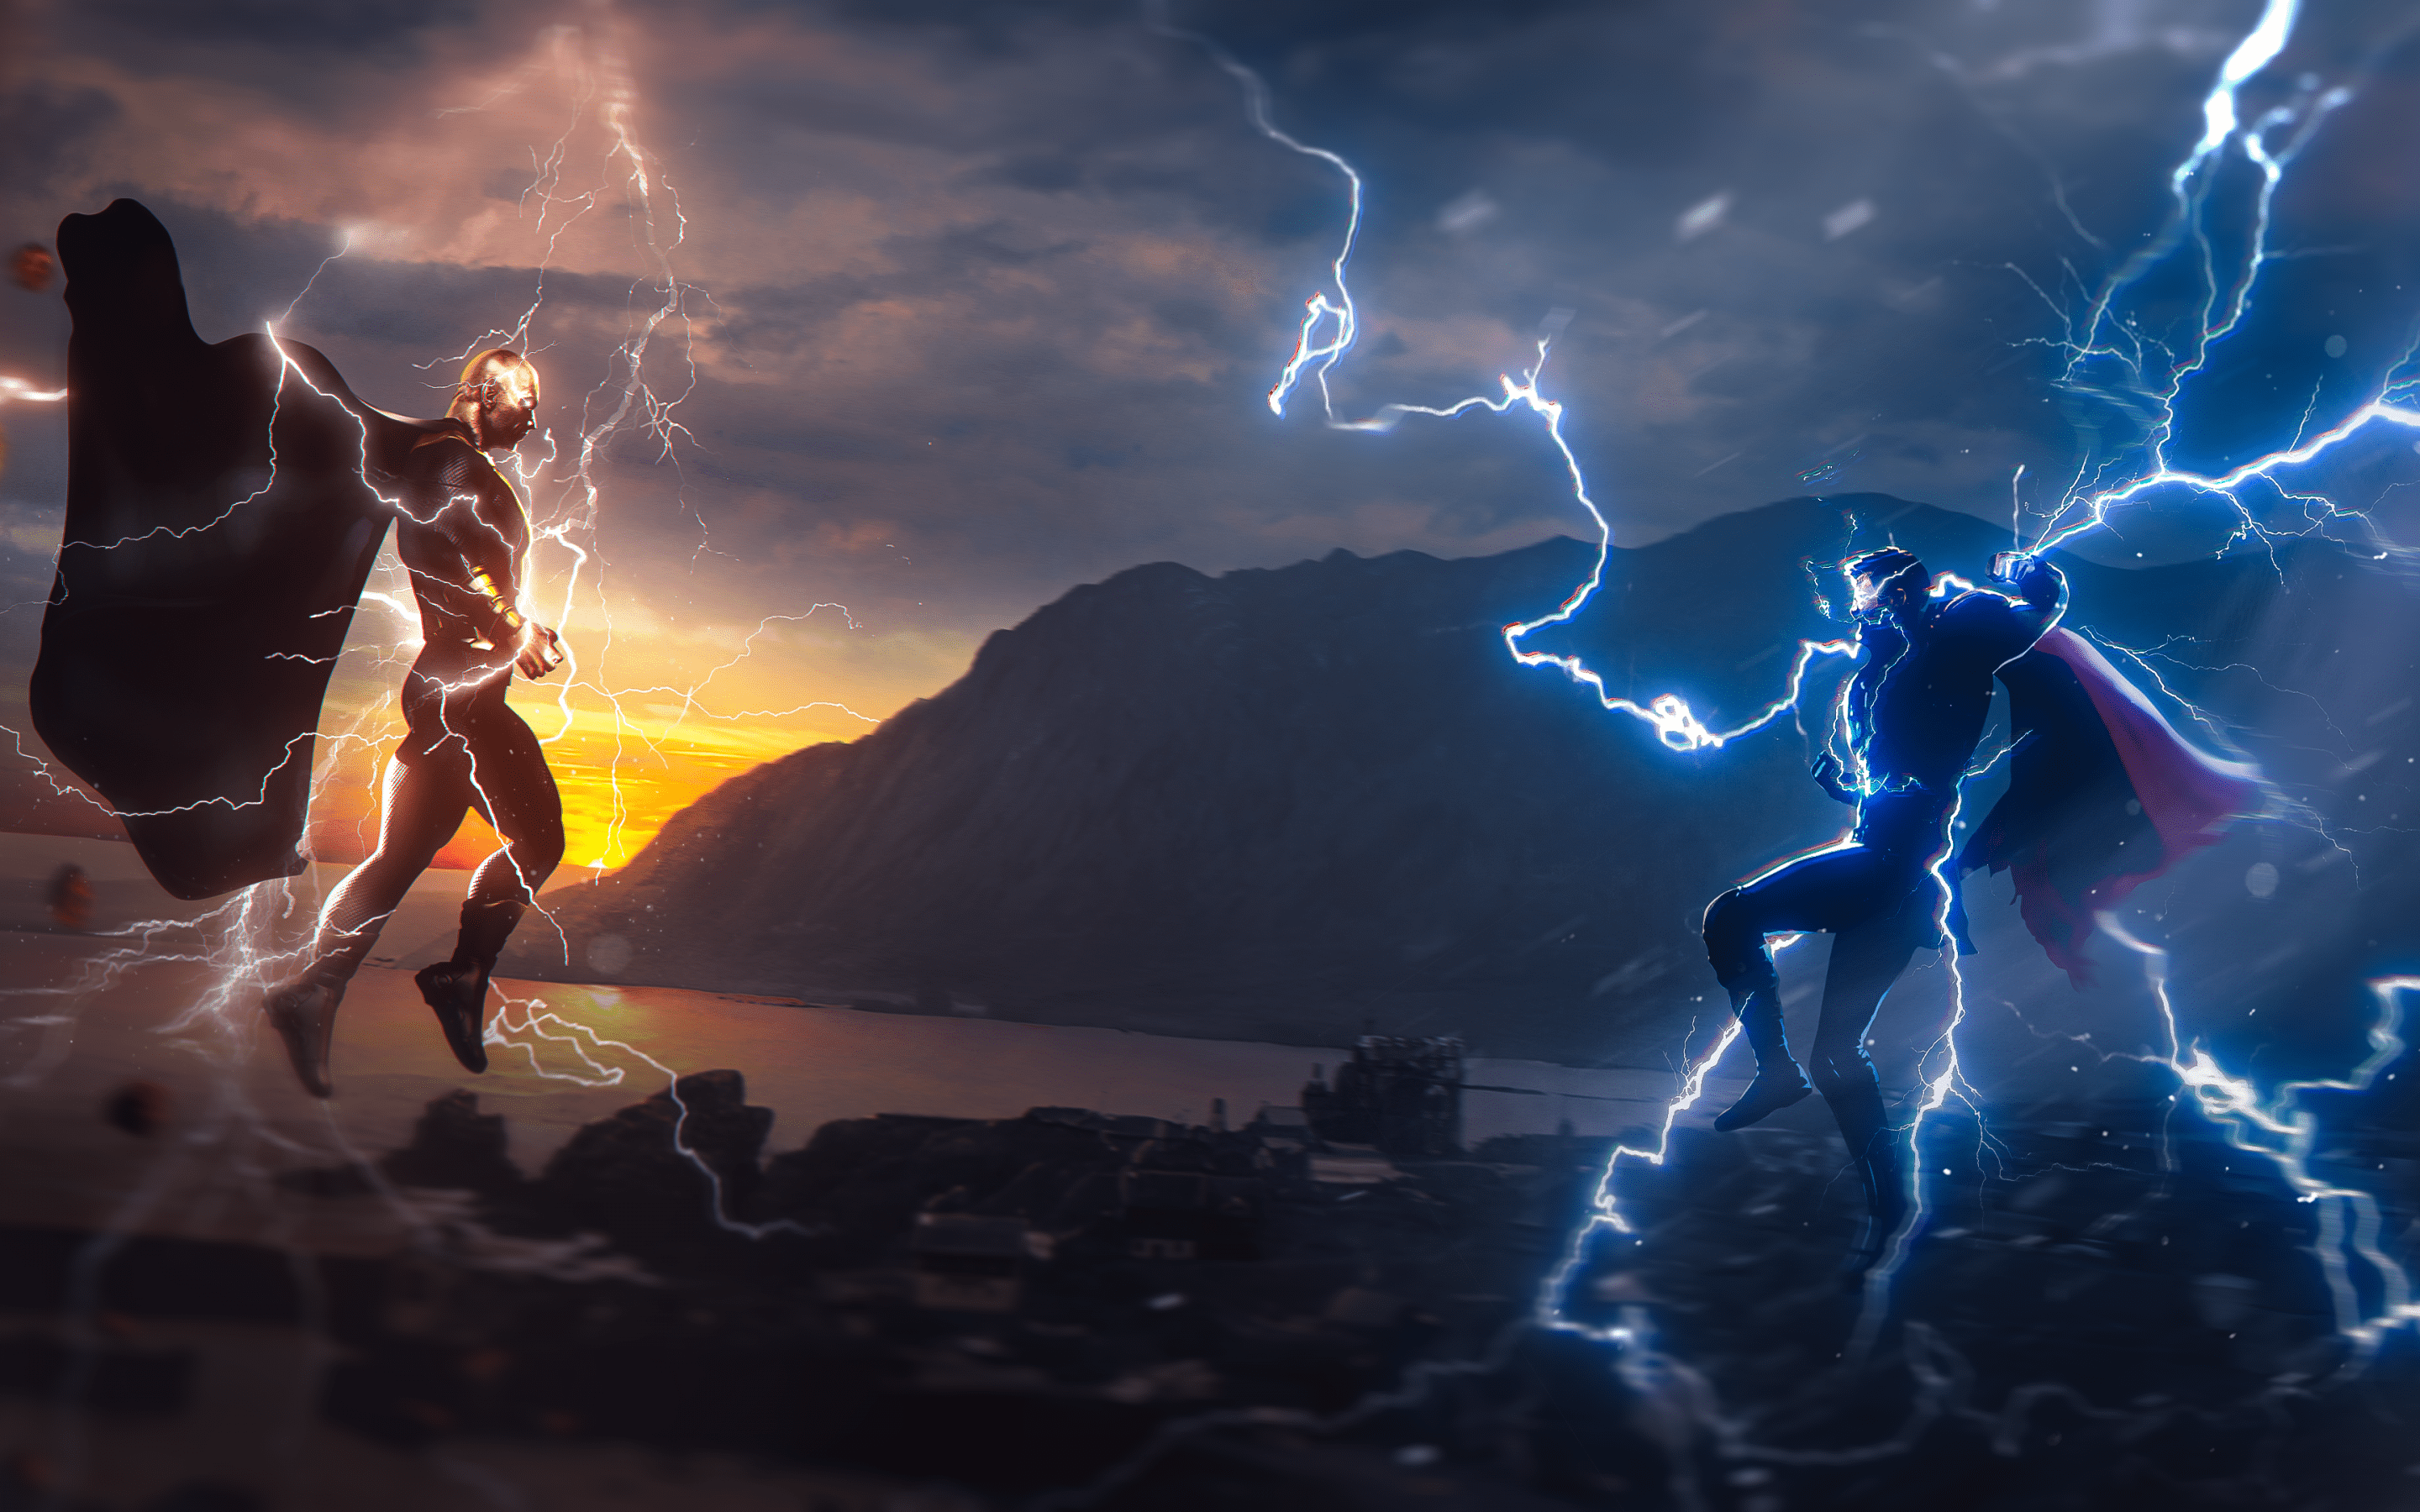 Superheroes in the middle of a battle with lightning - Thor